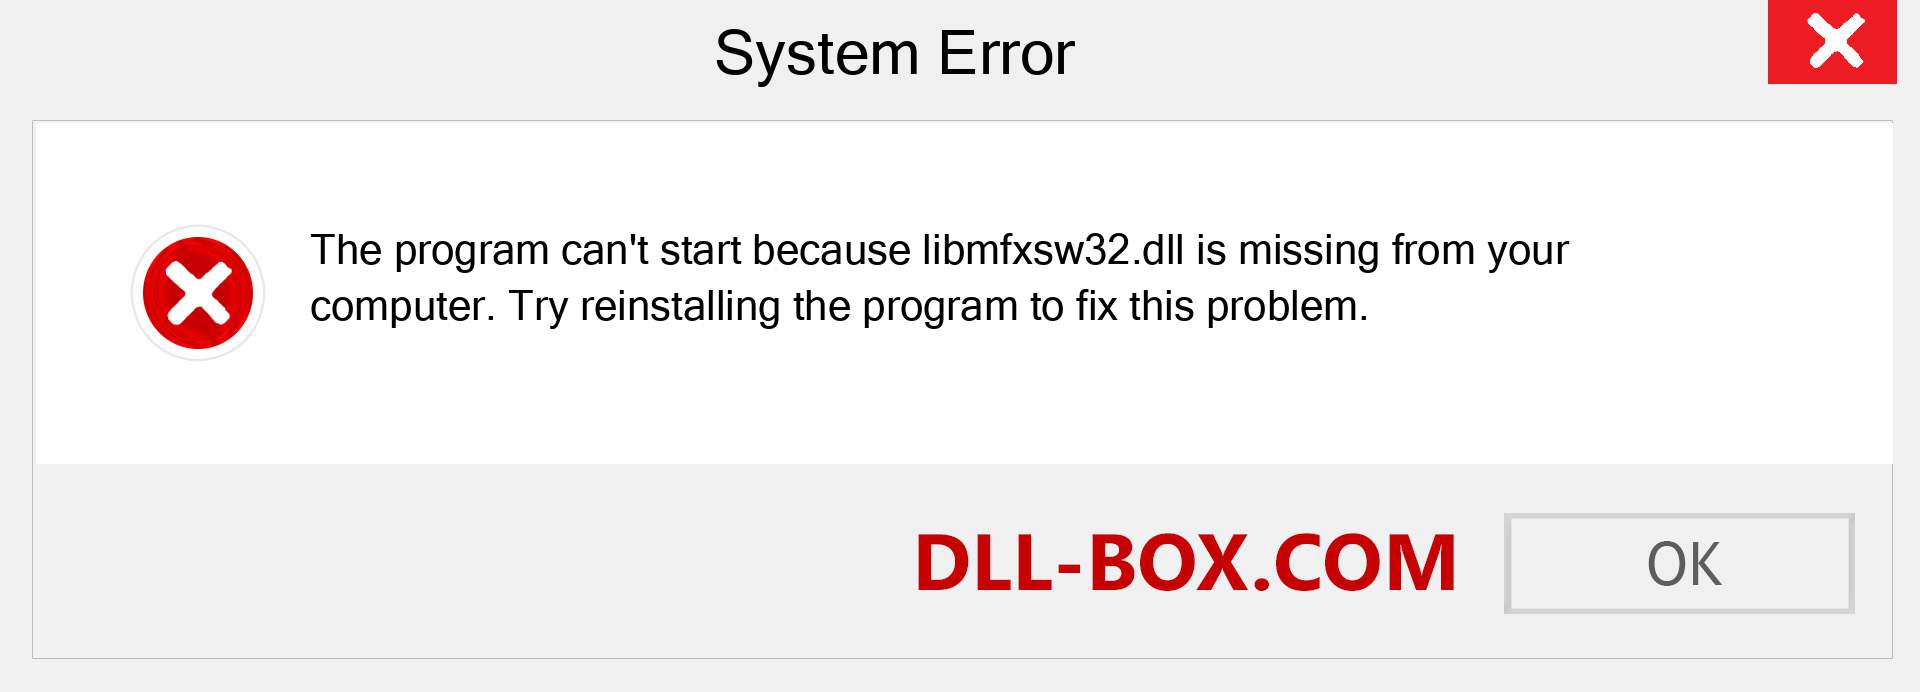  libmfxsw32.dll file is missing?. Download for Windows 7, 8, 10 - Fix  libmfxsw32 dll Missing Error on Windows, photos, images